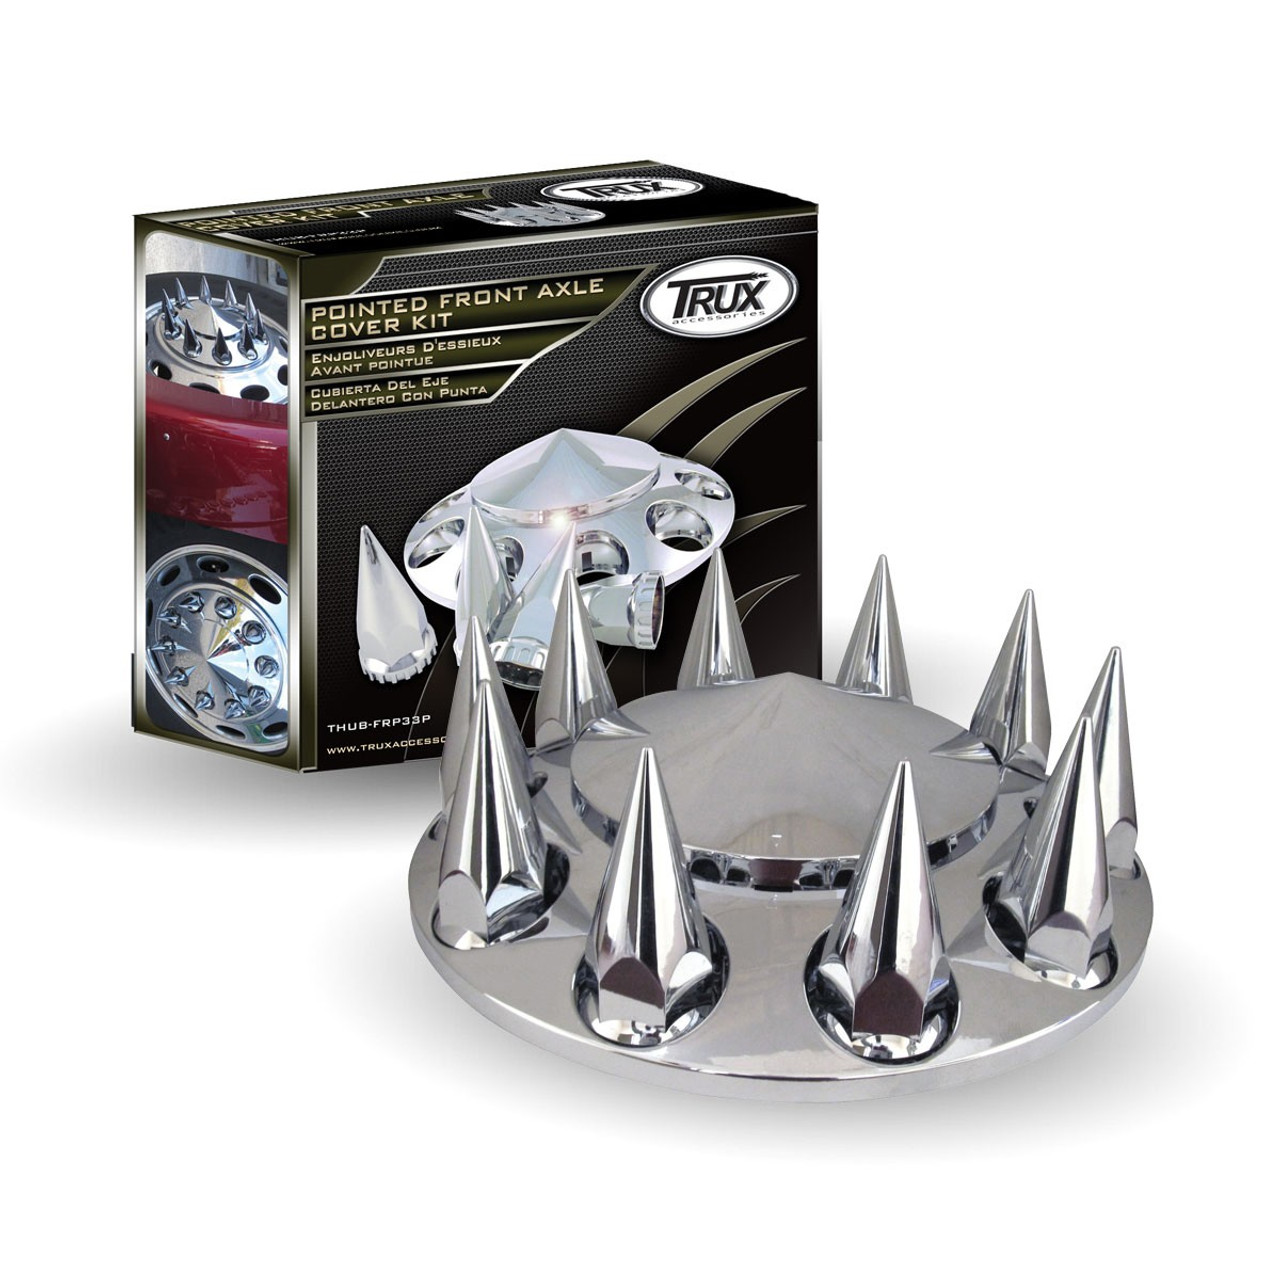 CHROME ABS PLASTIC FRONT POINTED AXLE COVER KIT WITH REMOVABLE CENTER CAP & 33MM THREADED POINTED NUT COVERS